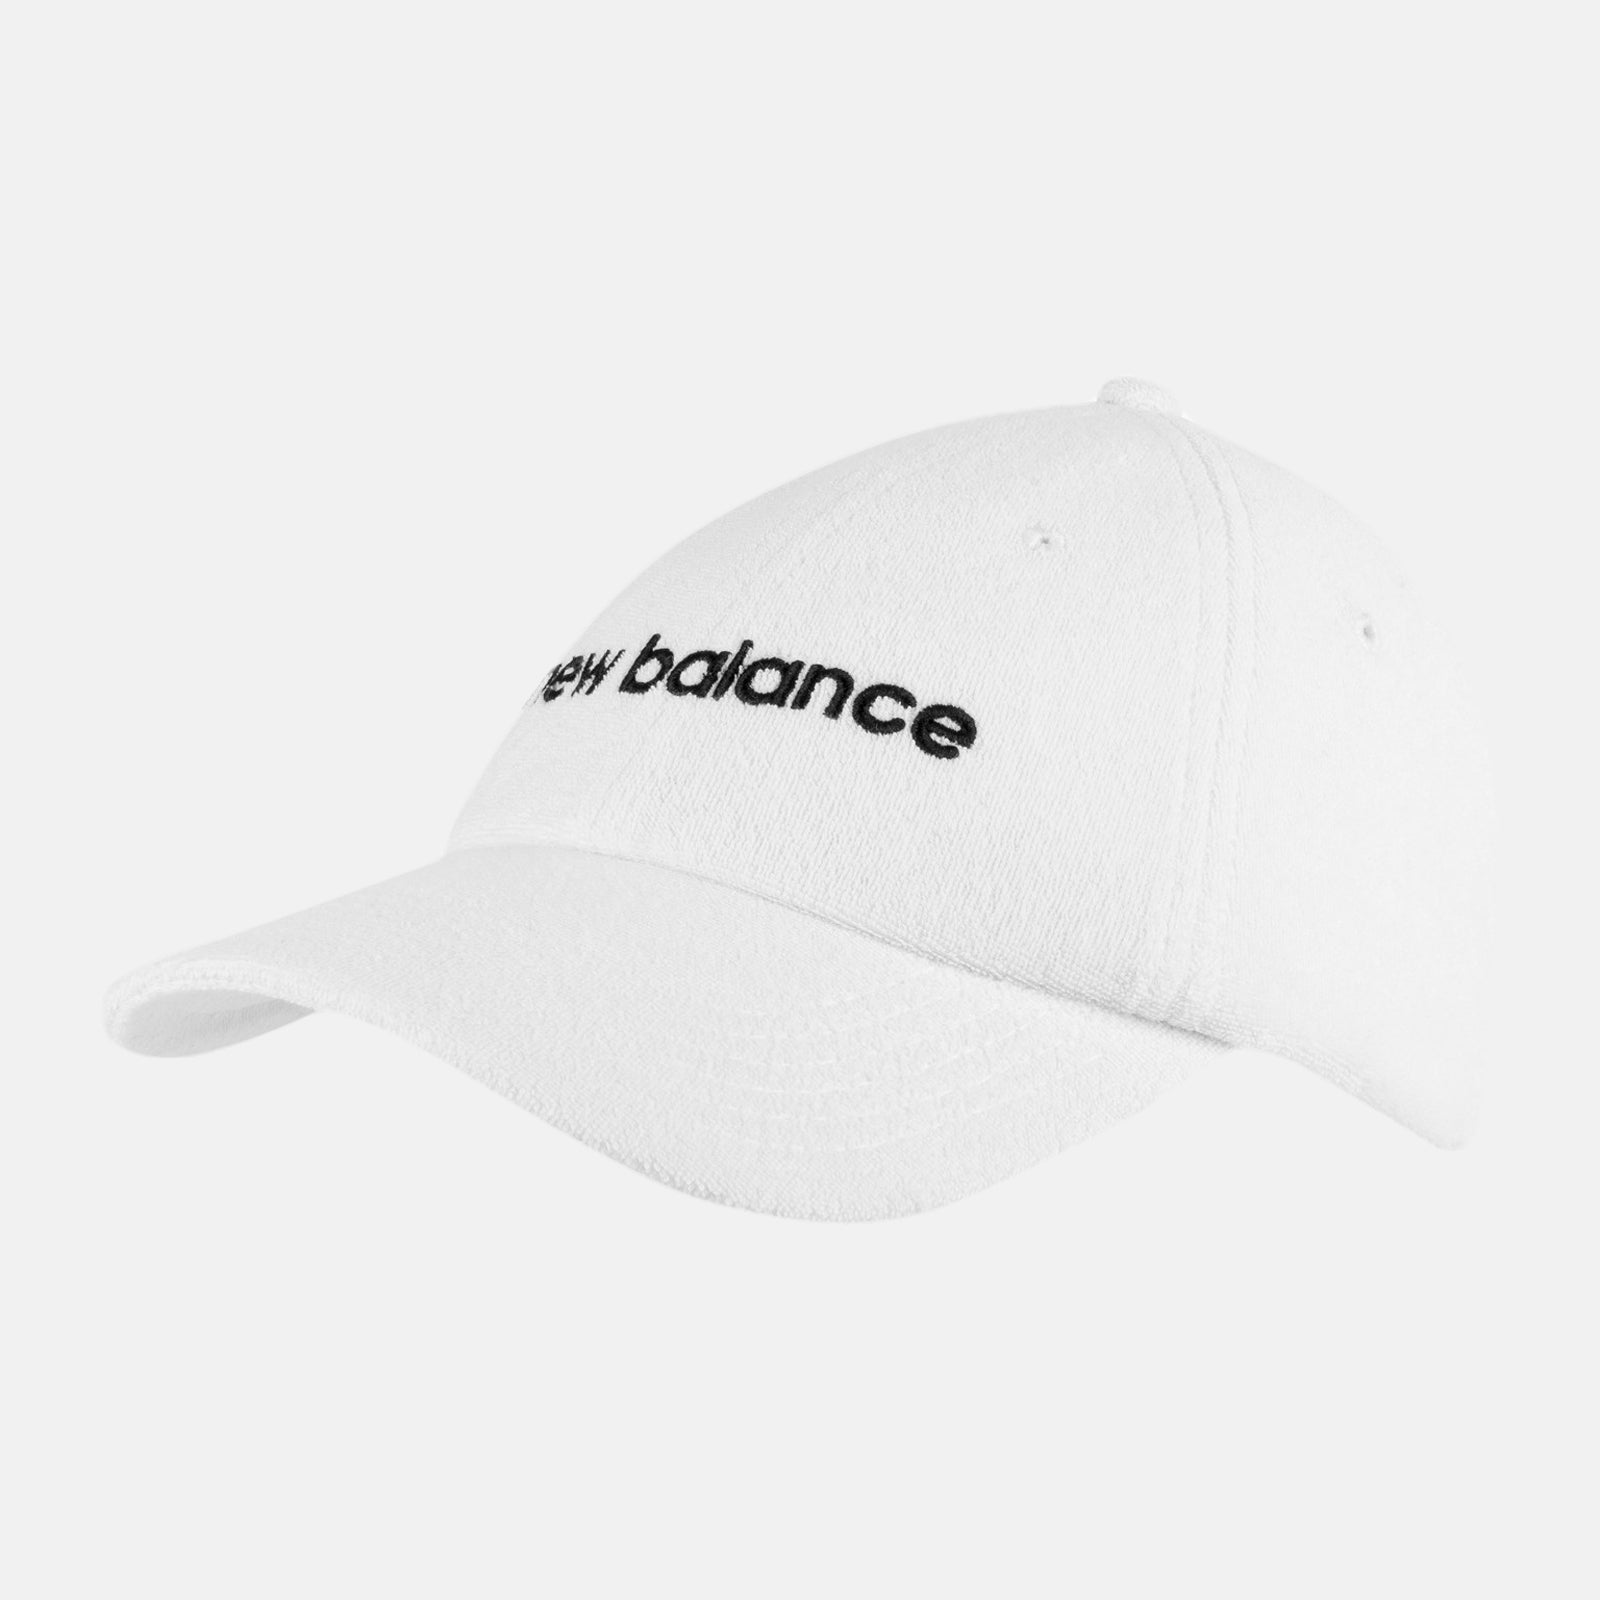 NEW BALANCE Terry 6-Panel Classic Hat in White LAH31003 O/S WHITE FROM EIGHTYWINGOLD - OFFICIAL BRAND PARTNER